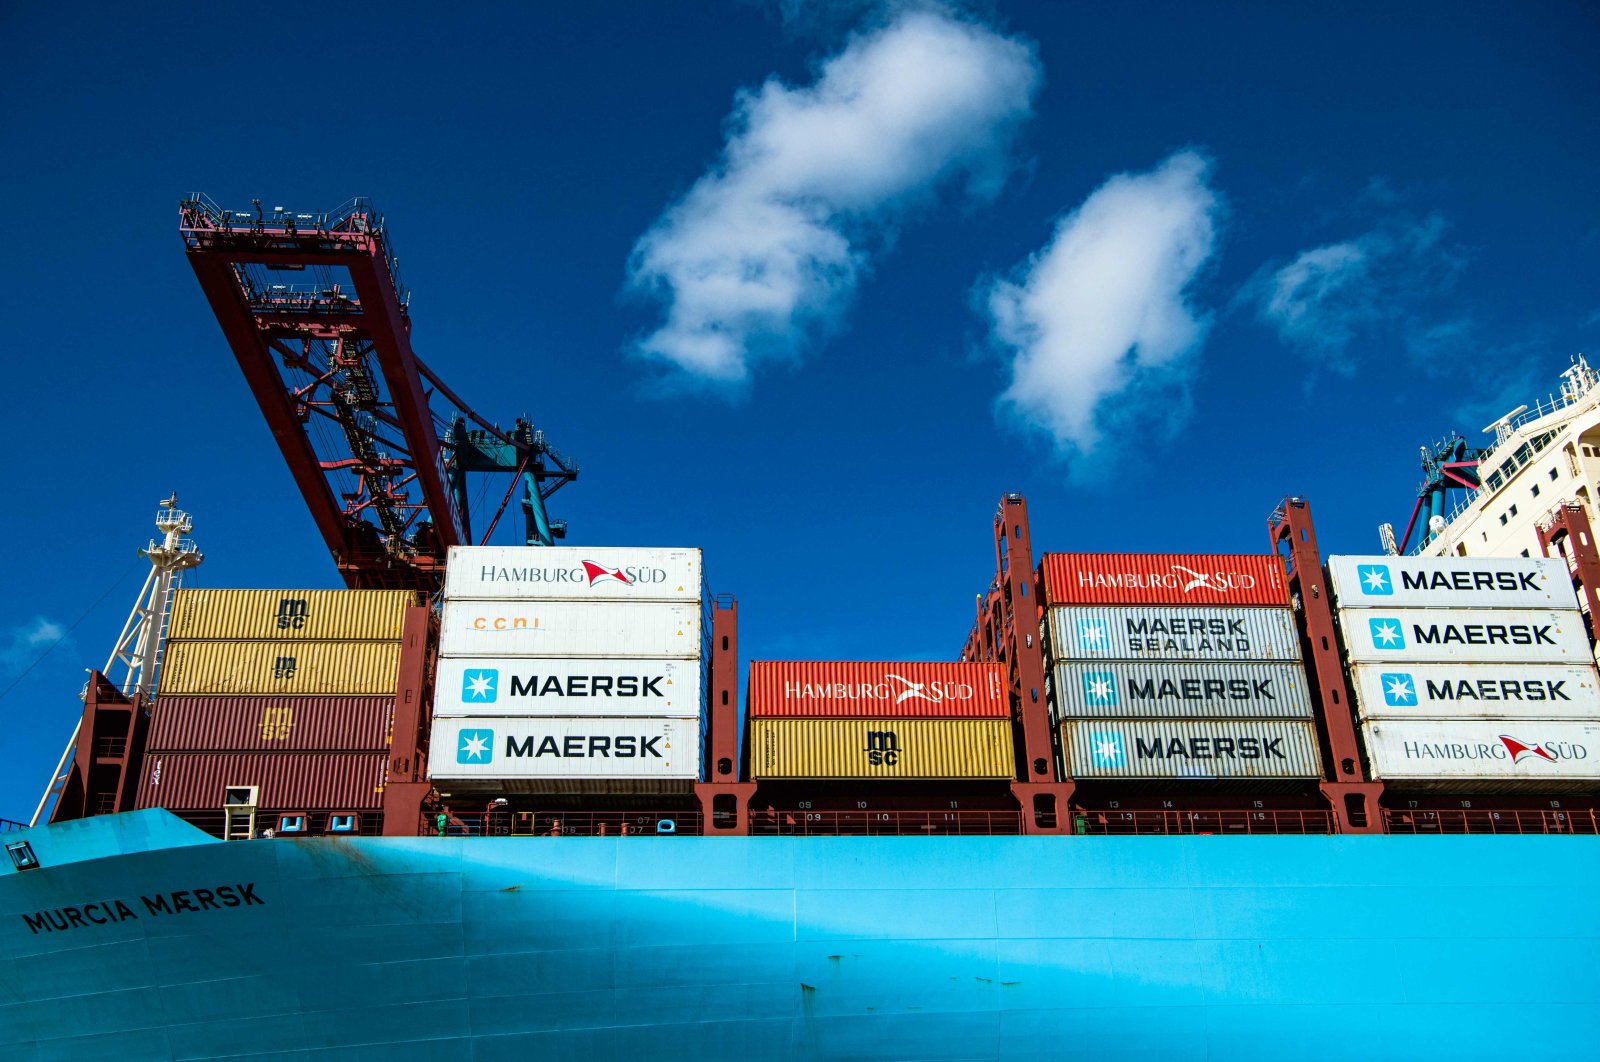 The container ship Maersk Murcia is moored at a terminal in the port of Gothenburg, Sweden, Aug. 24, 2020. (AFP Photo)